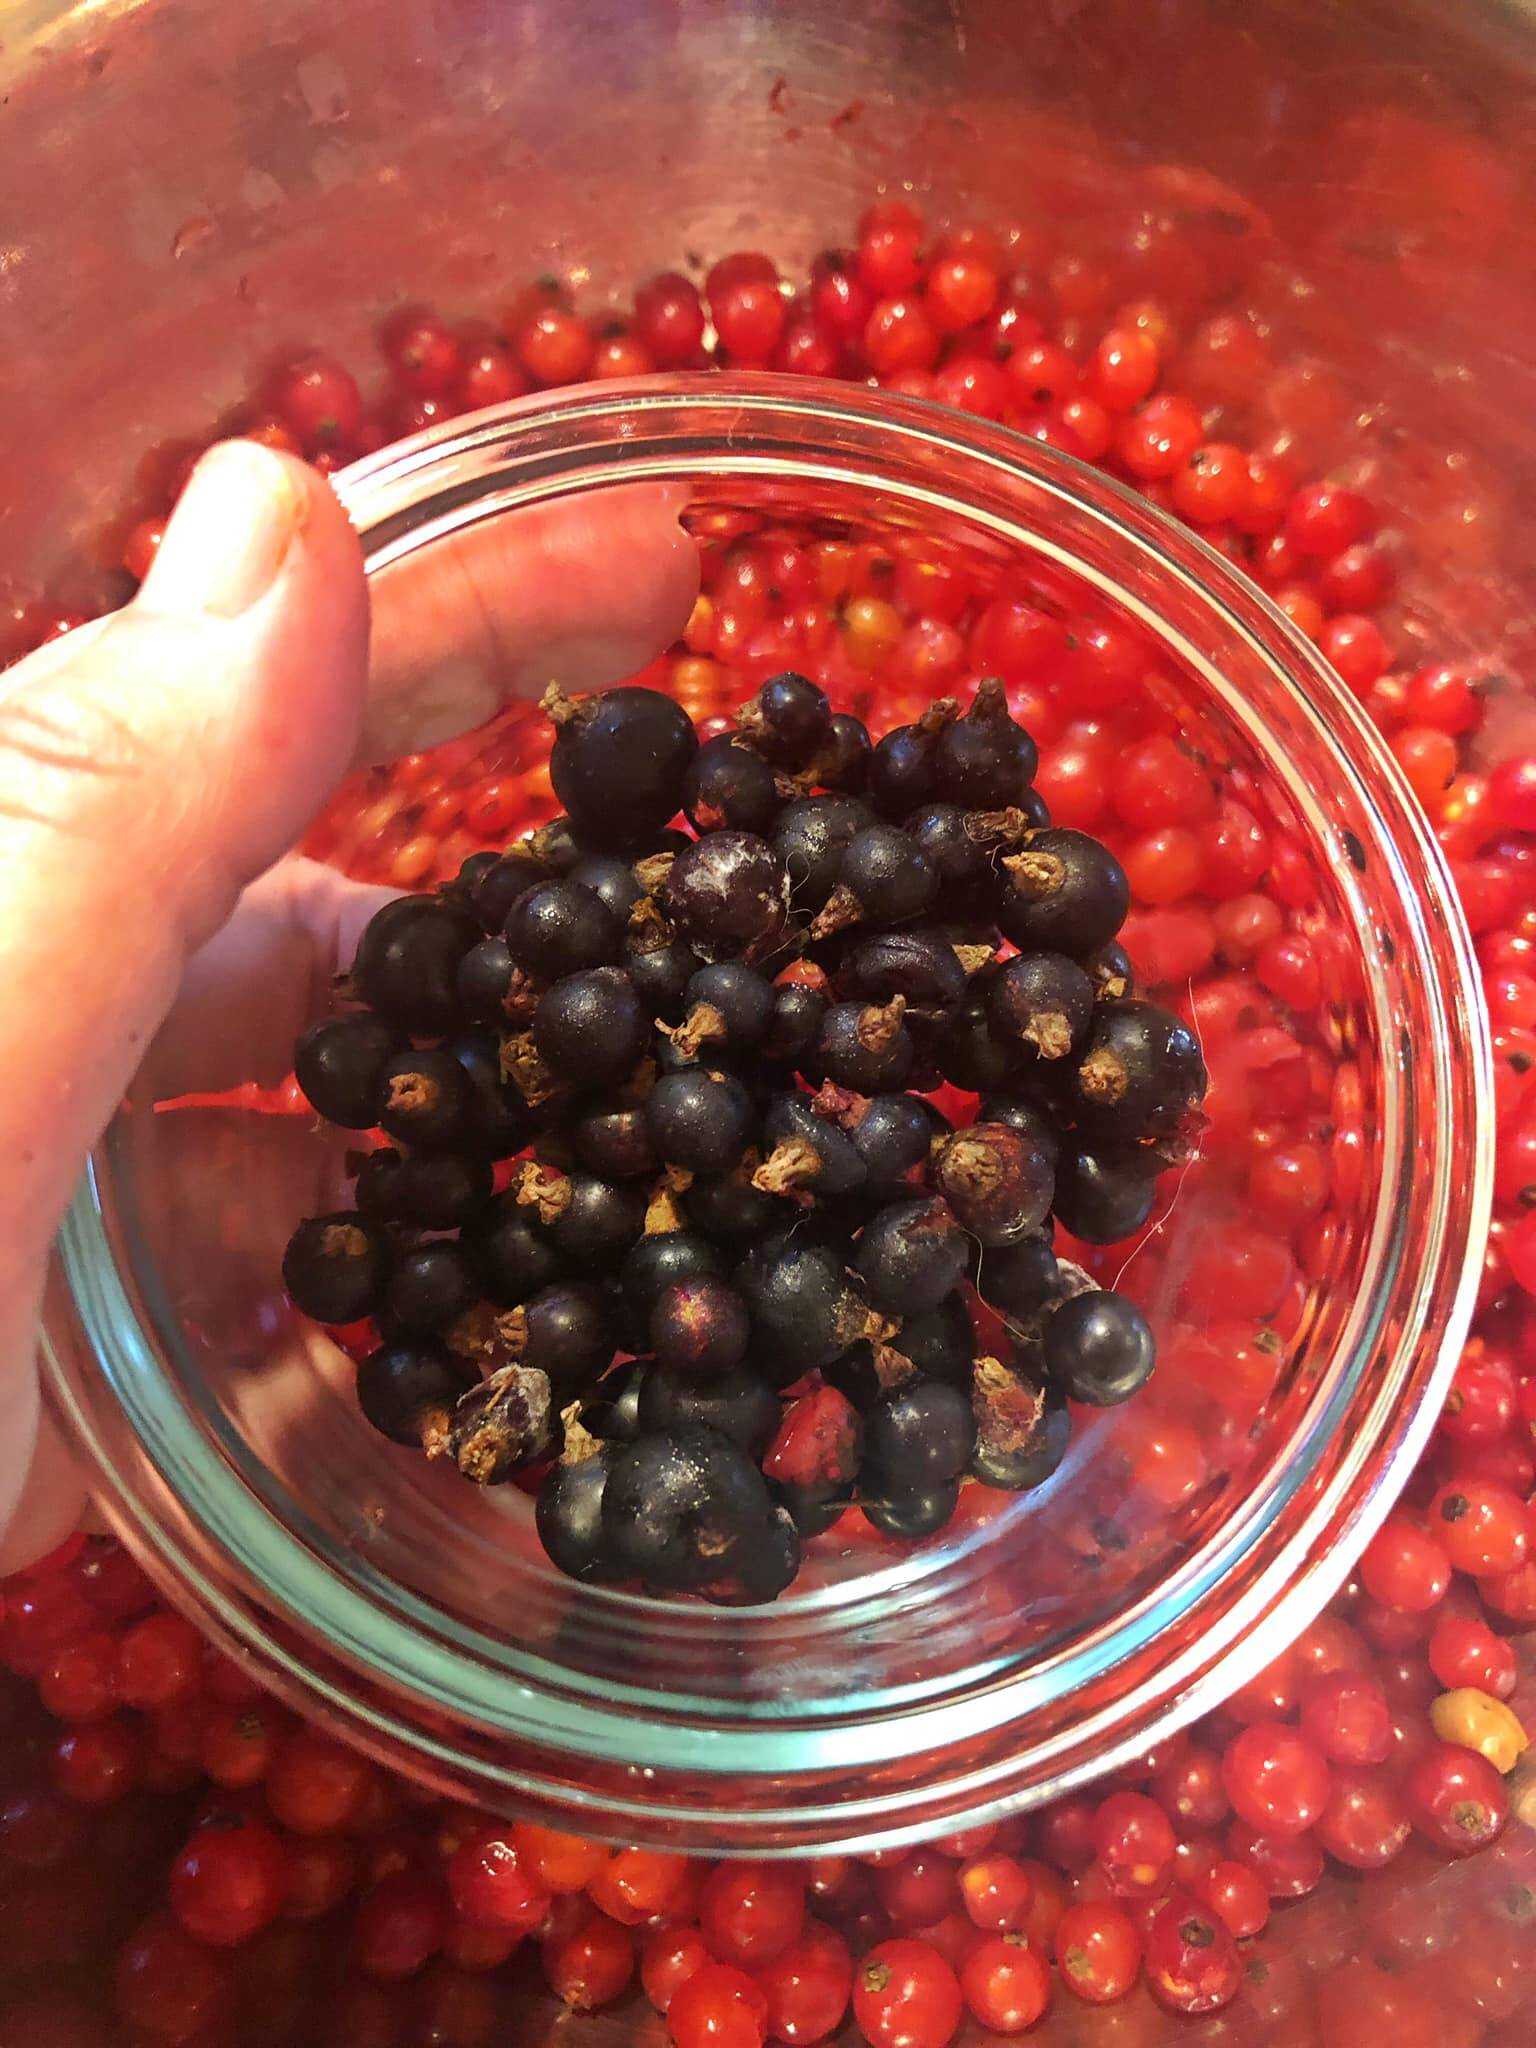 Black currants and red currants mix to make a currant jelly blend. (Vivian Mork Yeilk’ / For the Capital City Weekly)